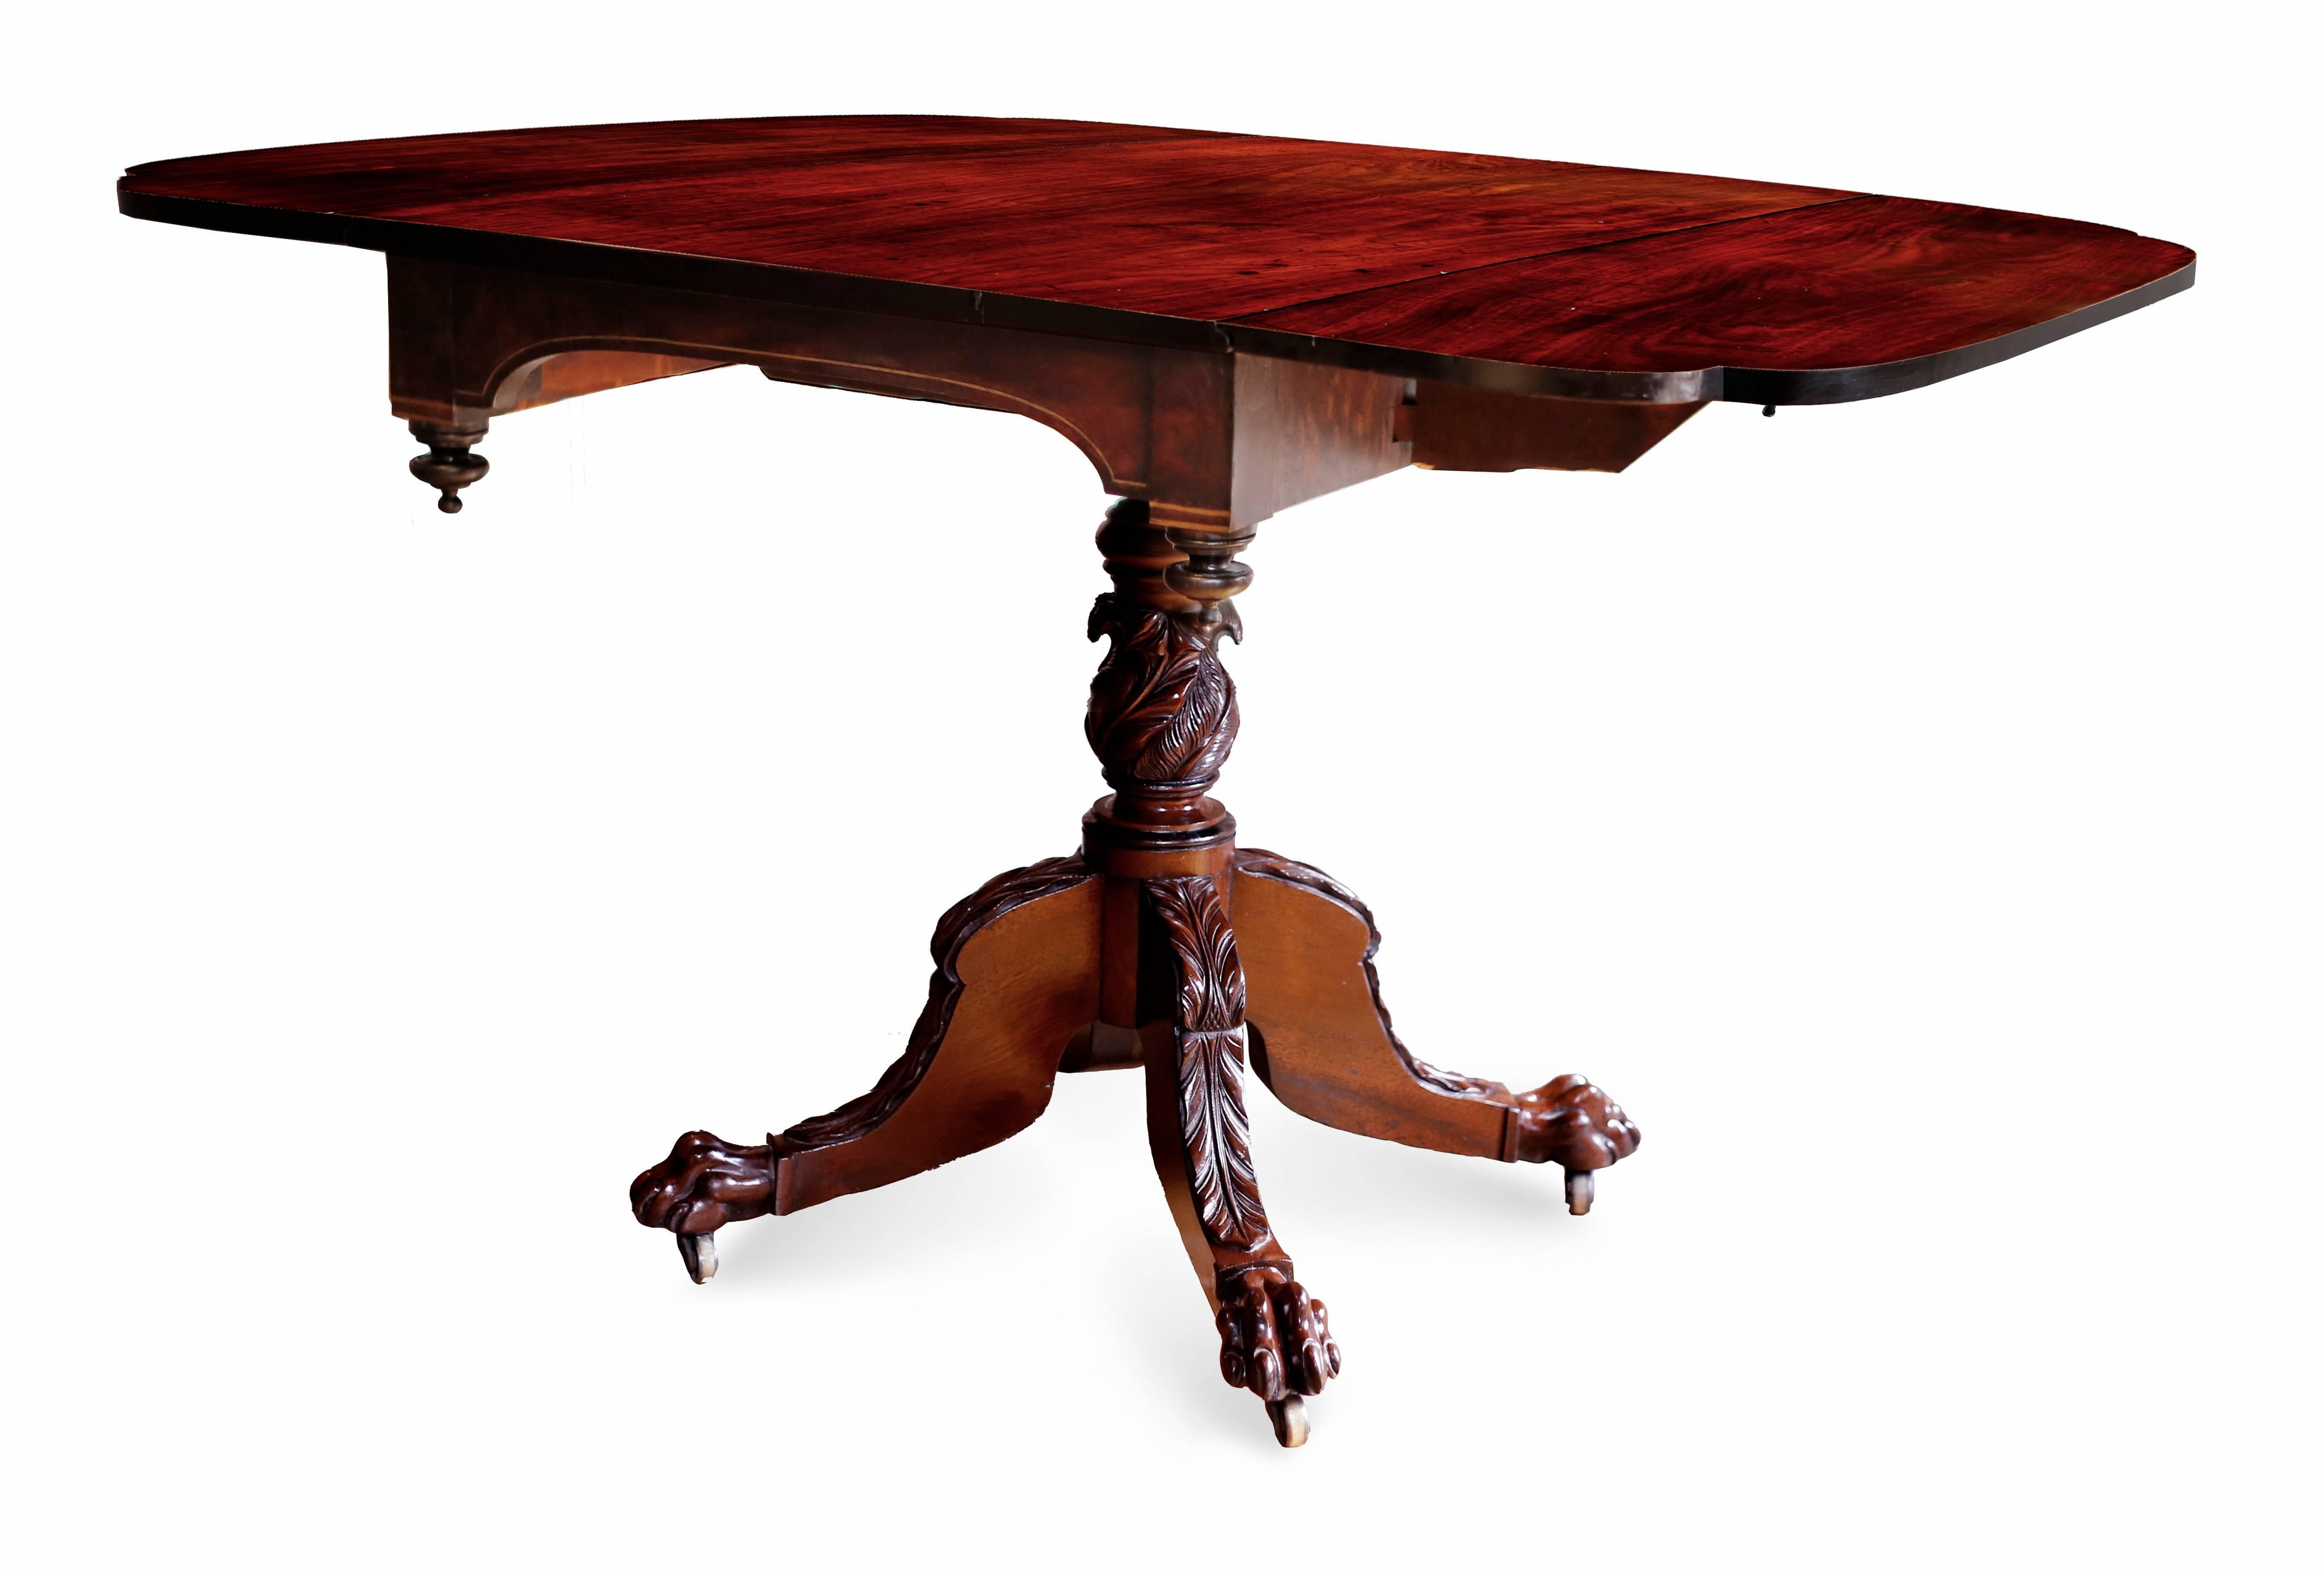 A fine Federal breakfast table in black walnut with a rectangular top and drop-leaves, the corners of which end in cyma curves, with inverted wooden finials. The table skirt also features brass inlay, supported by a turned acanthus and plume carved